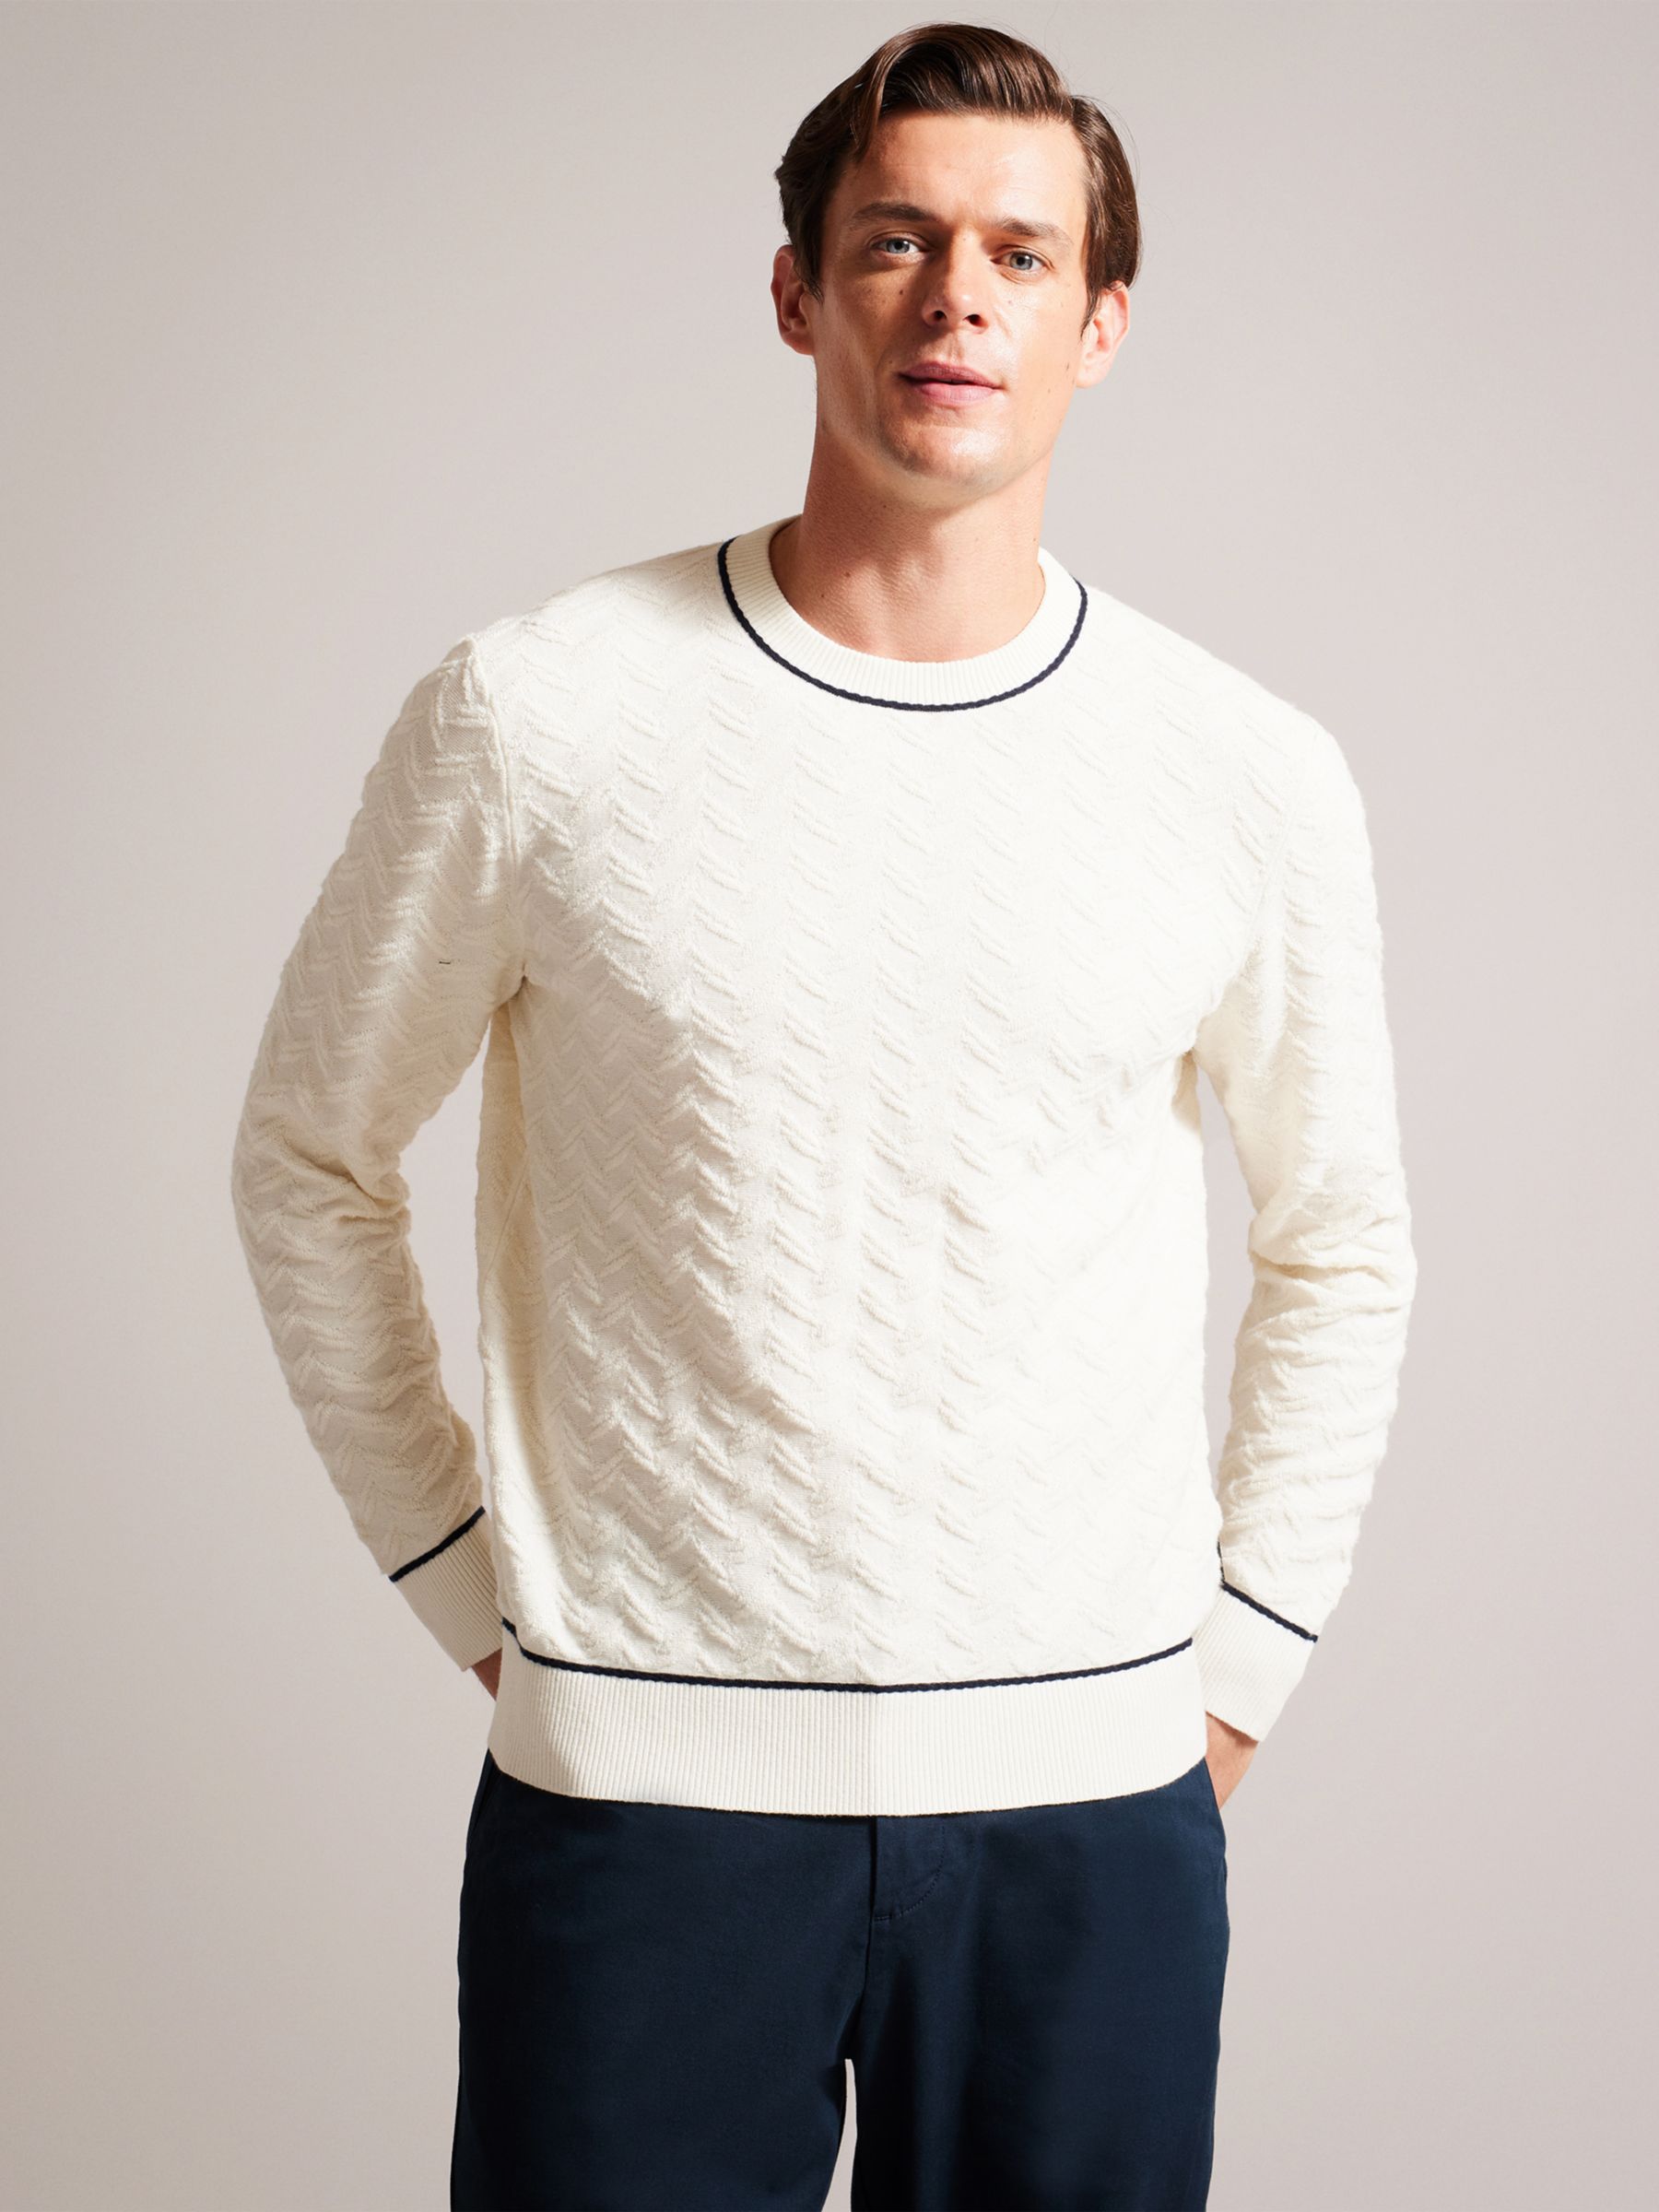 Ted Baker Sepal Long Sleeve Textured Crew Neck Jumper, White, XS